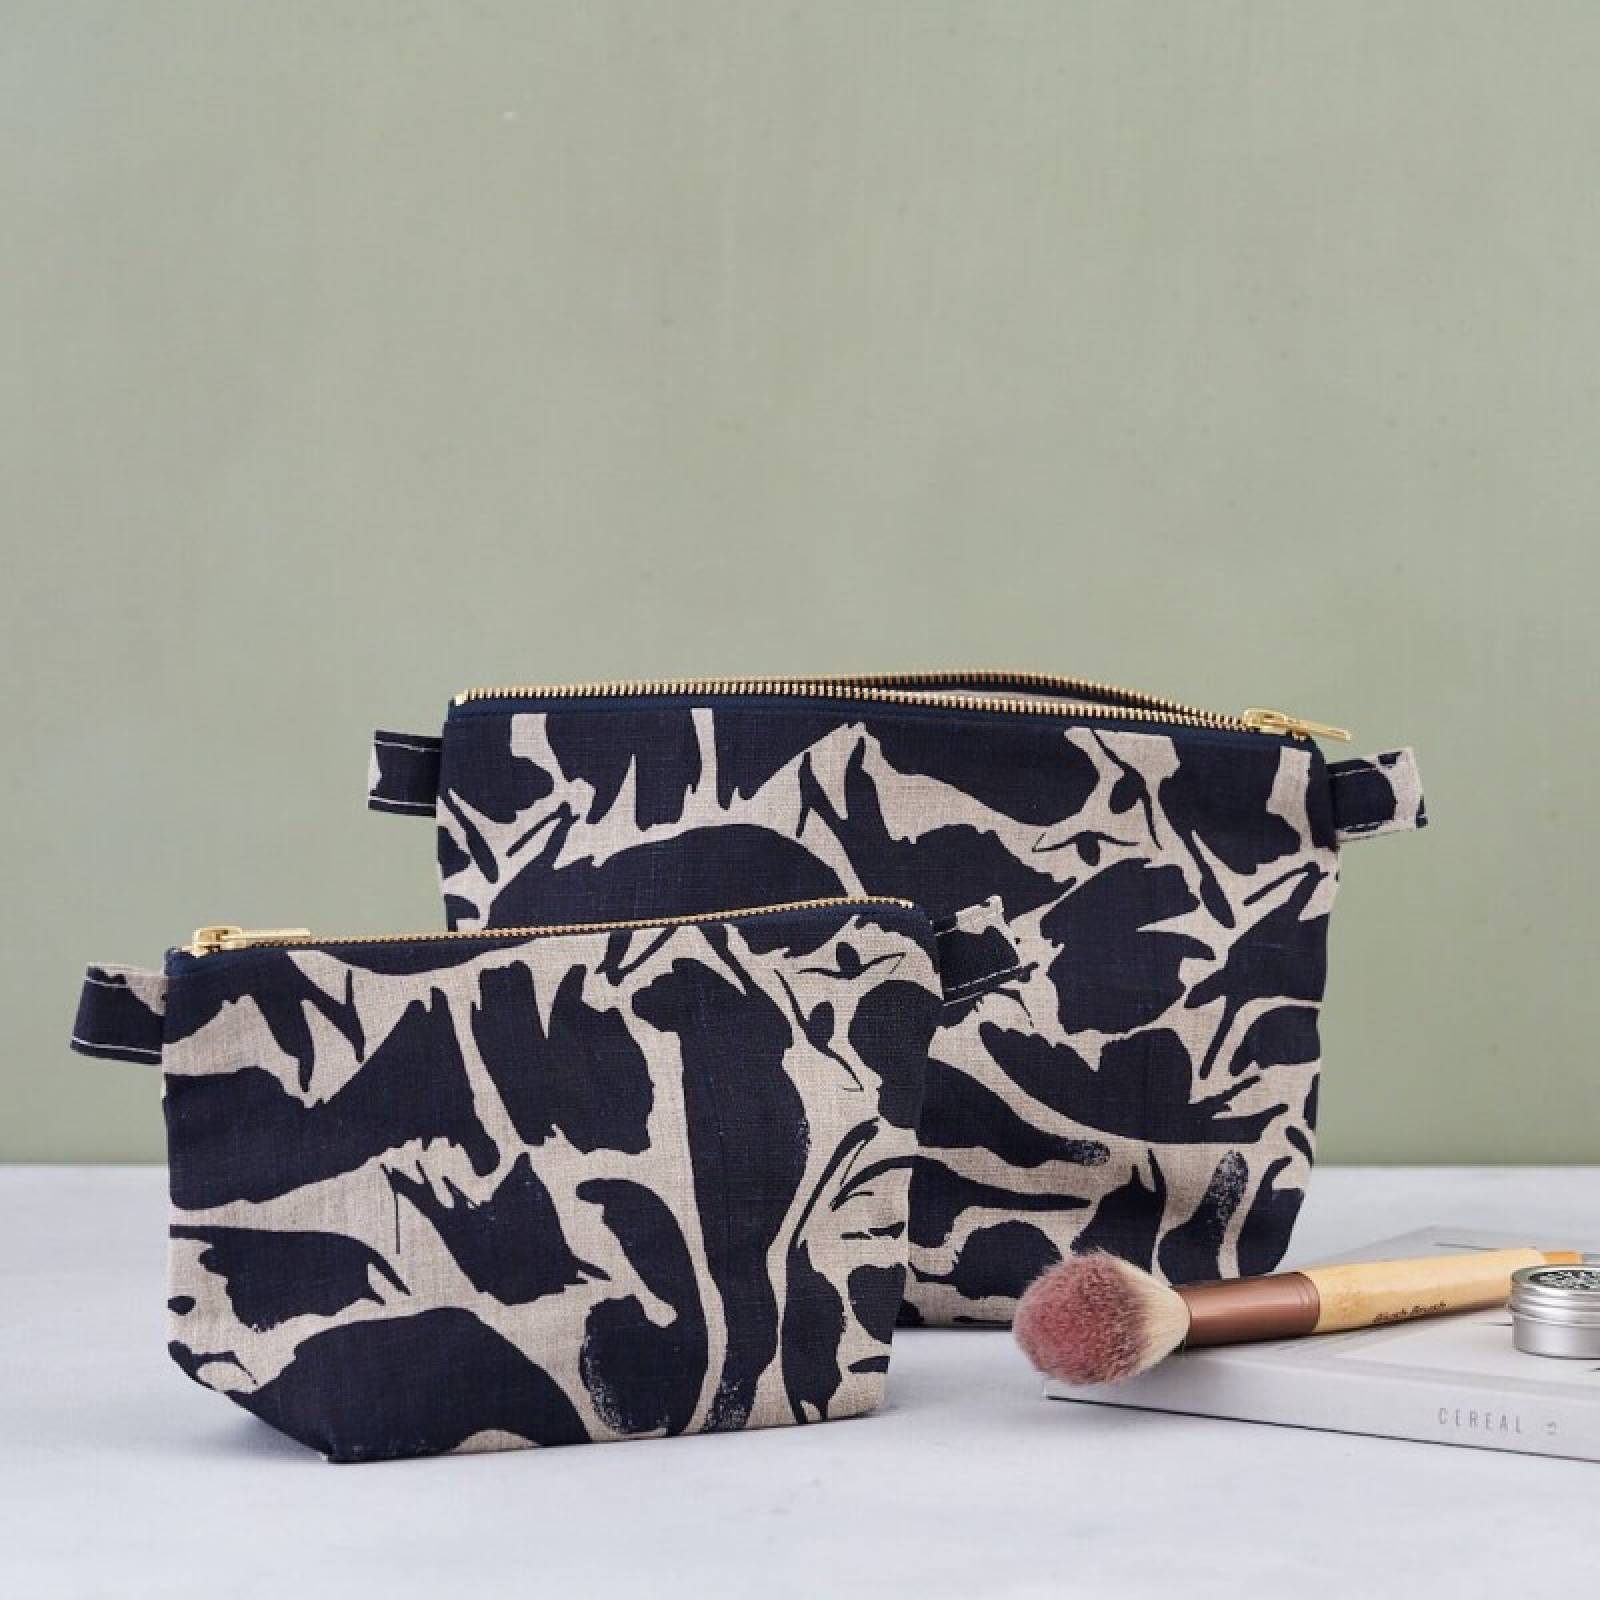 Small Linen Wash Bag In Navy Creatures Print thumbnails